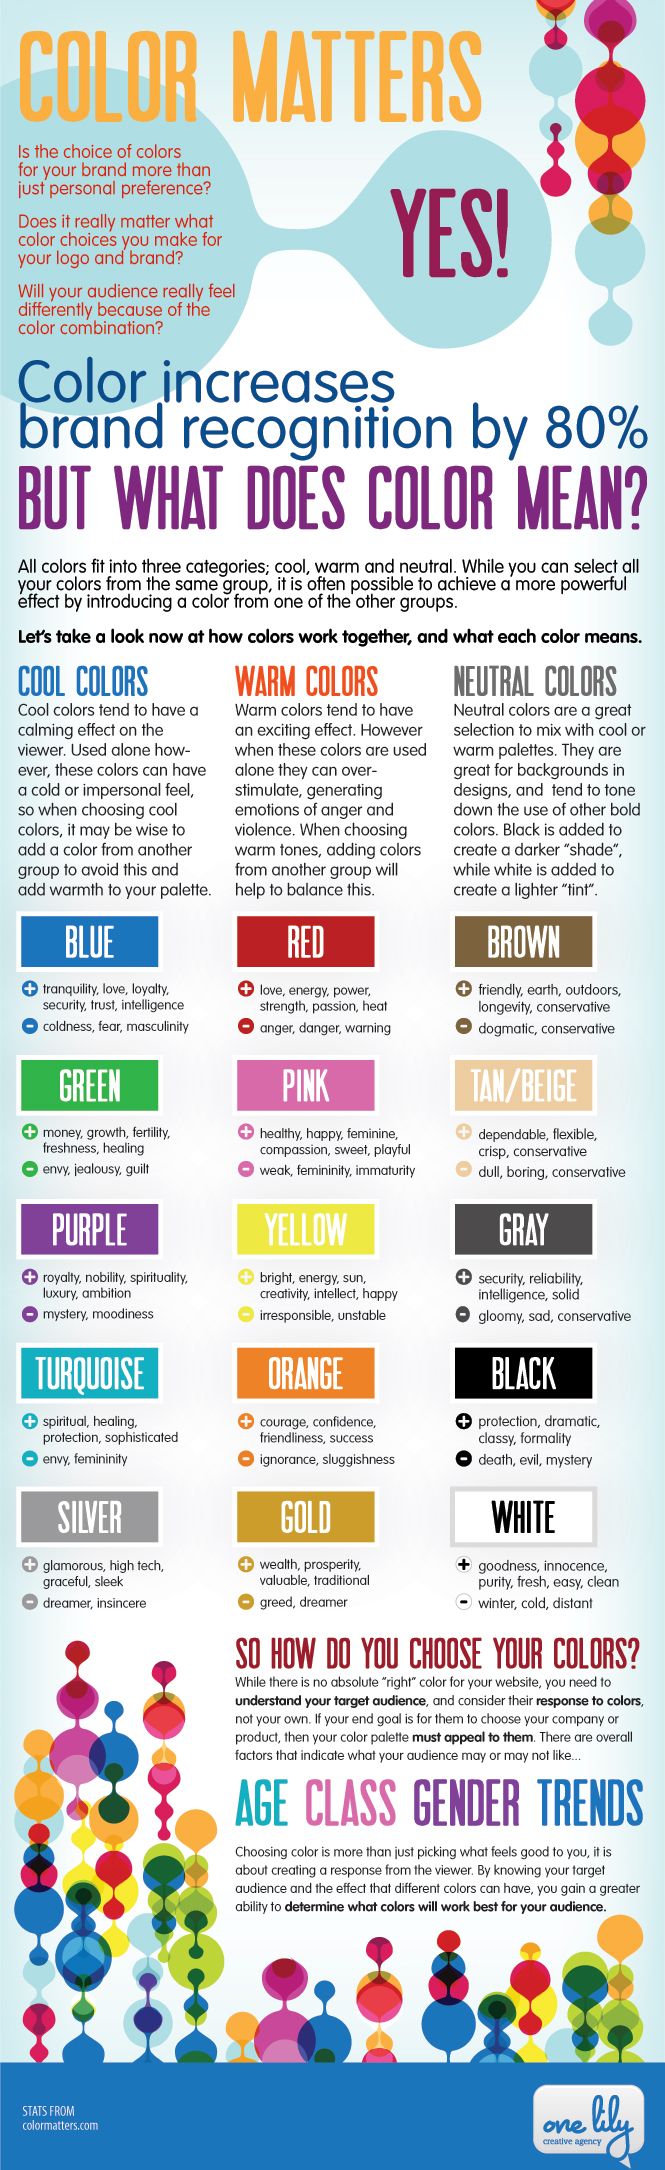 Psychology-Infographic-COLR-MATTERS-Why-color-matters-when-youre-planning-your-business-branding.-i Psychology Infographic : COLR MATTERS - Why color matters when you're planning your business branding. #i...